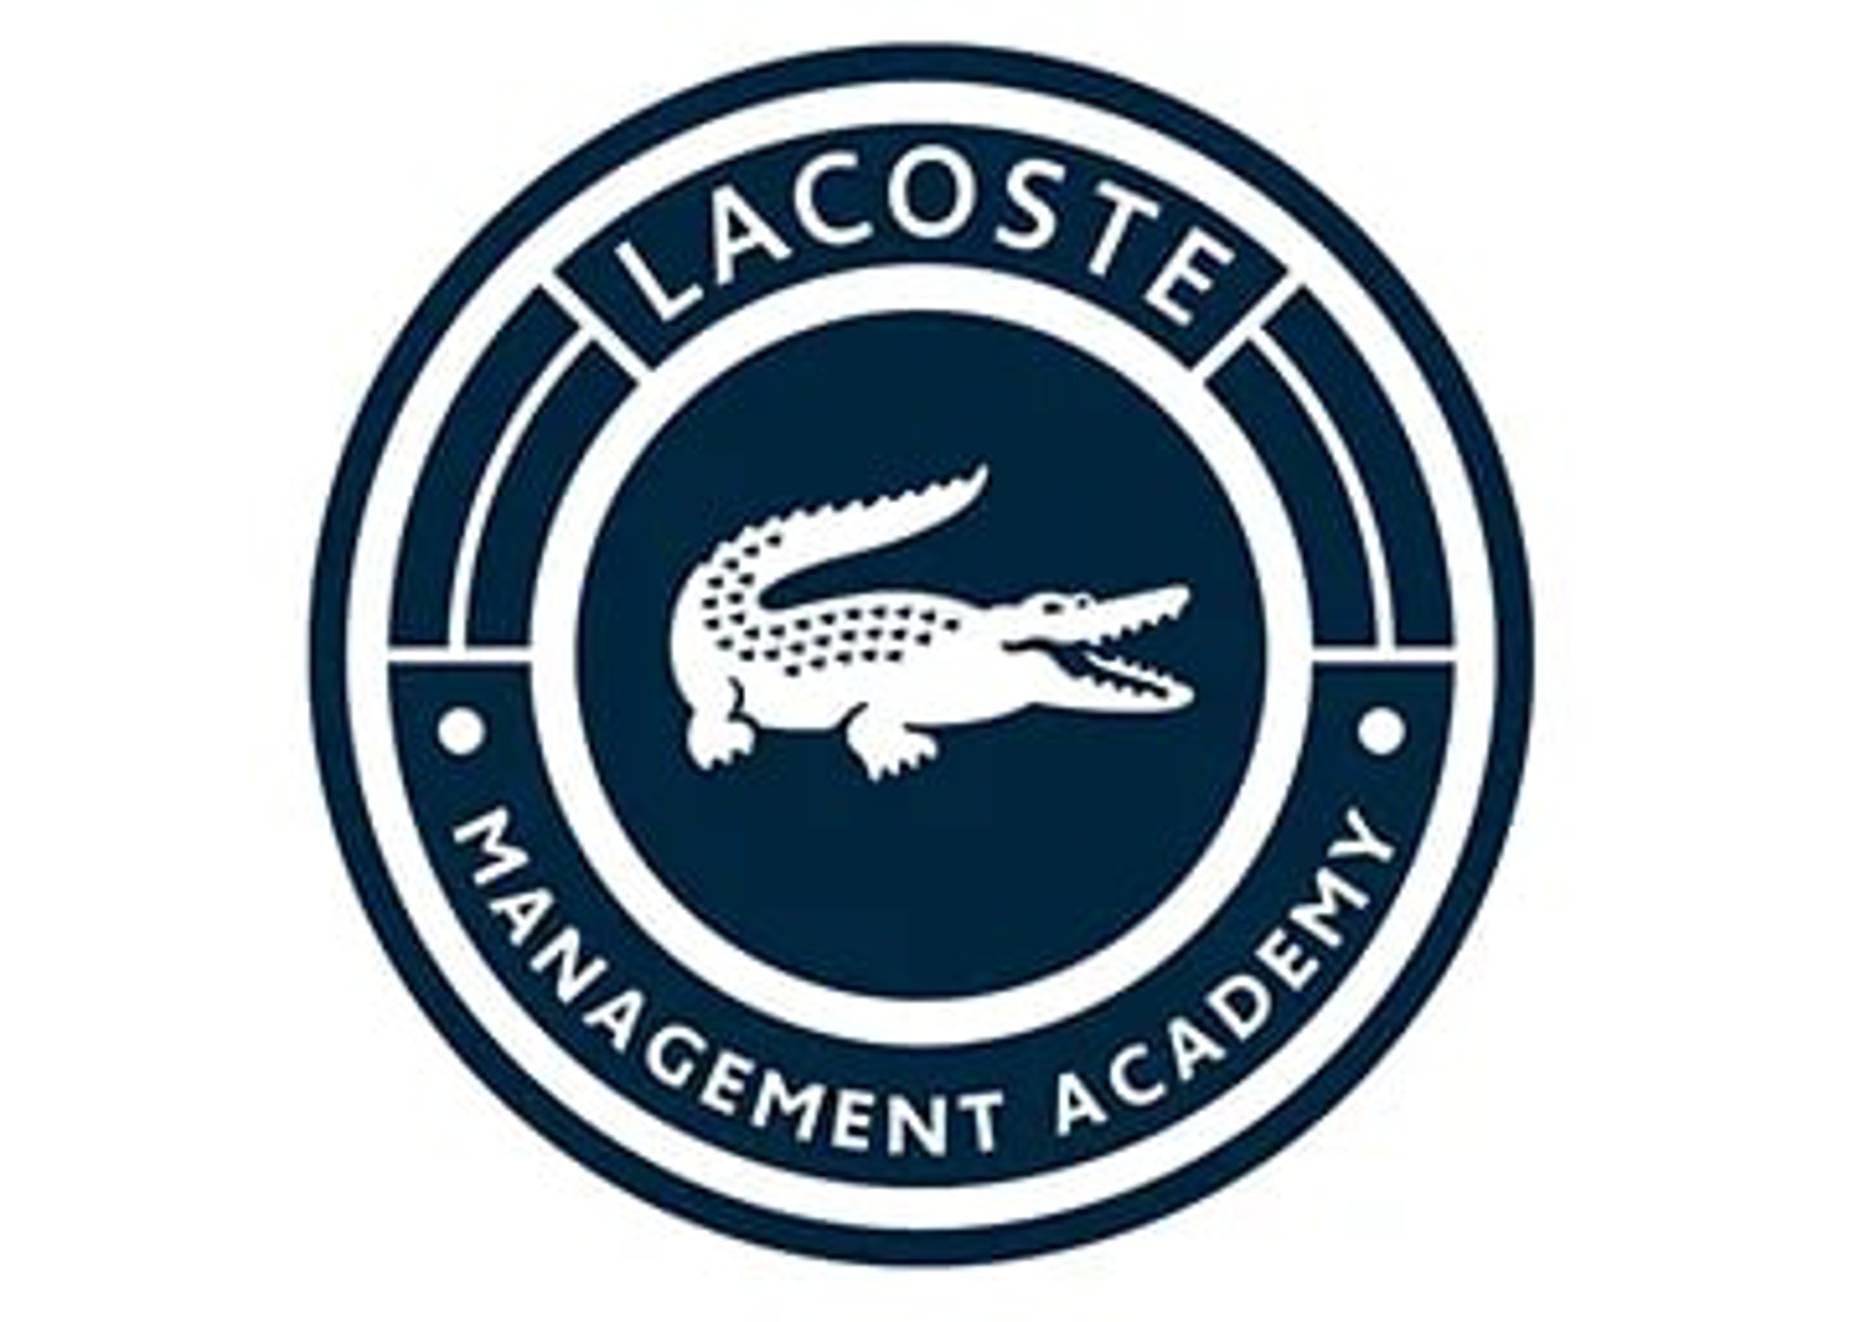 Grow with Lacoste